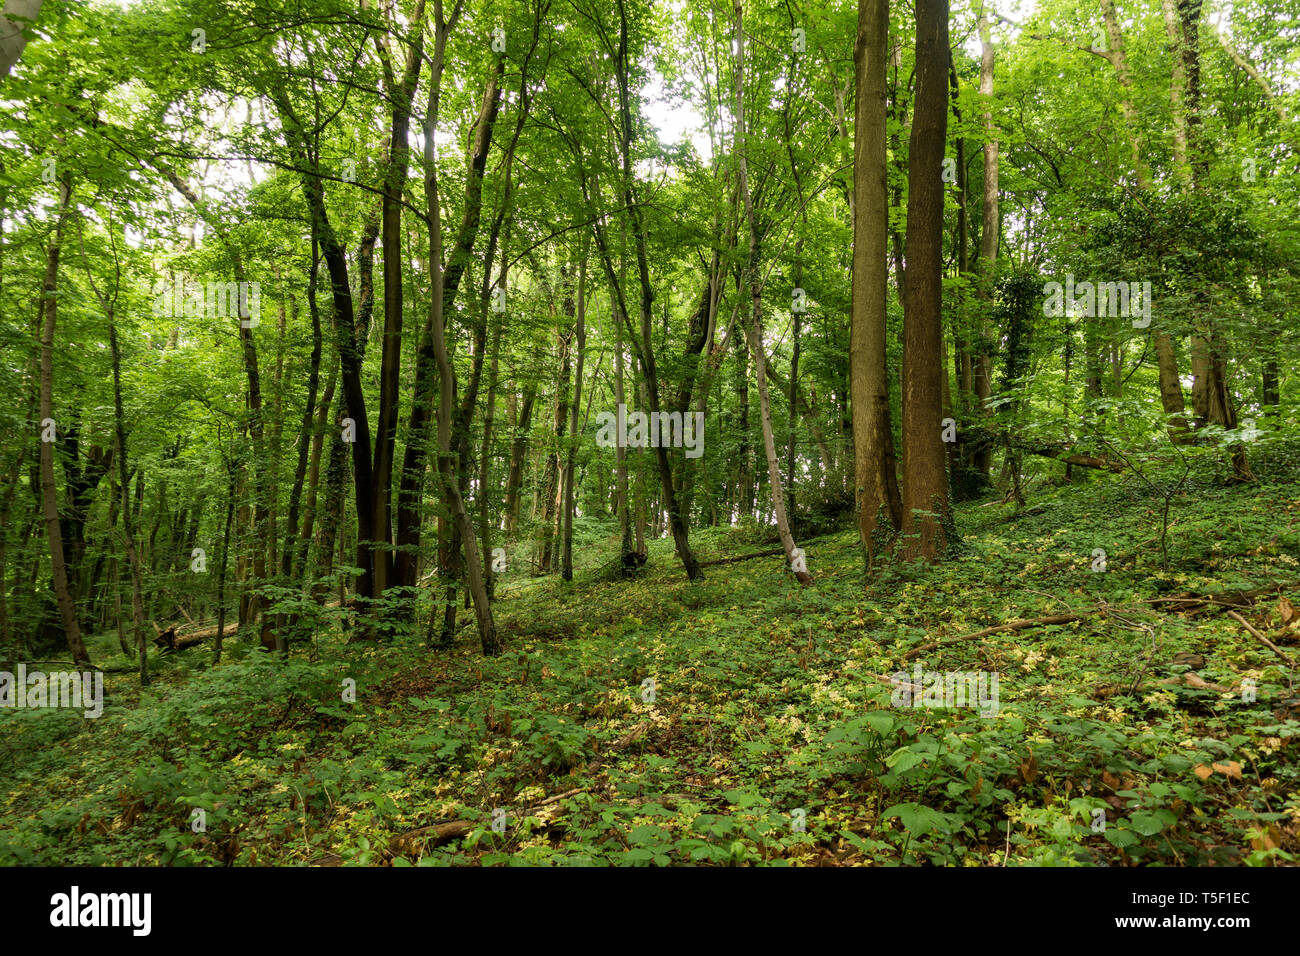 Lush vegetation of temperate deciduous forest in Limburg, South of Netherlands. Stock Photo